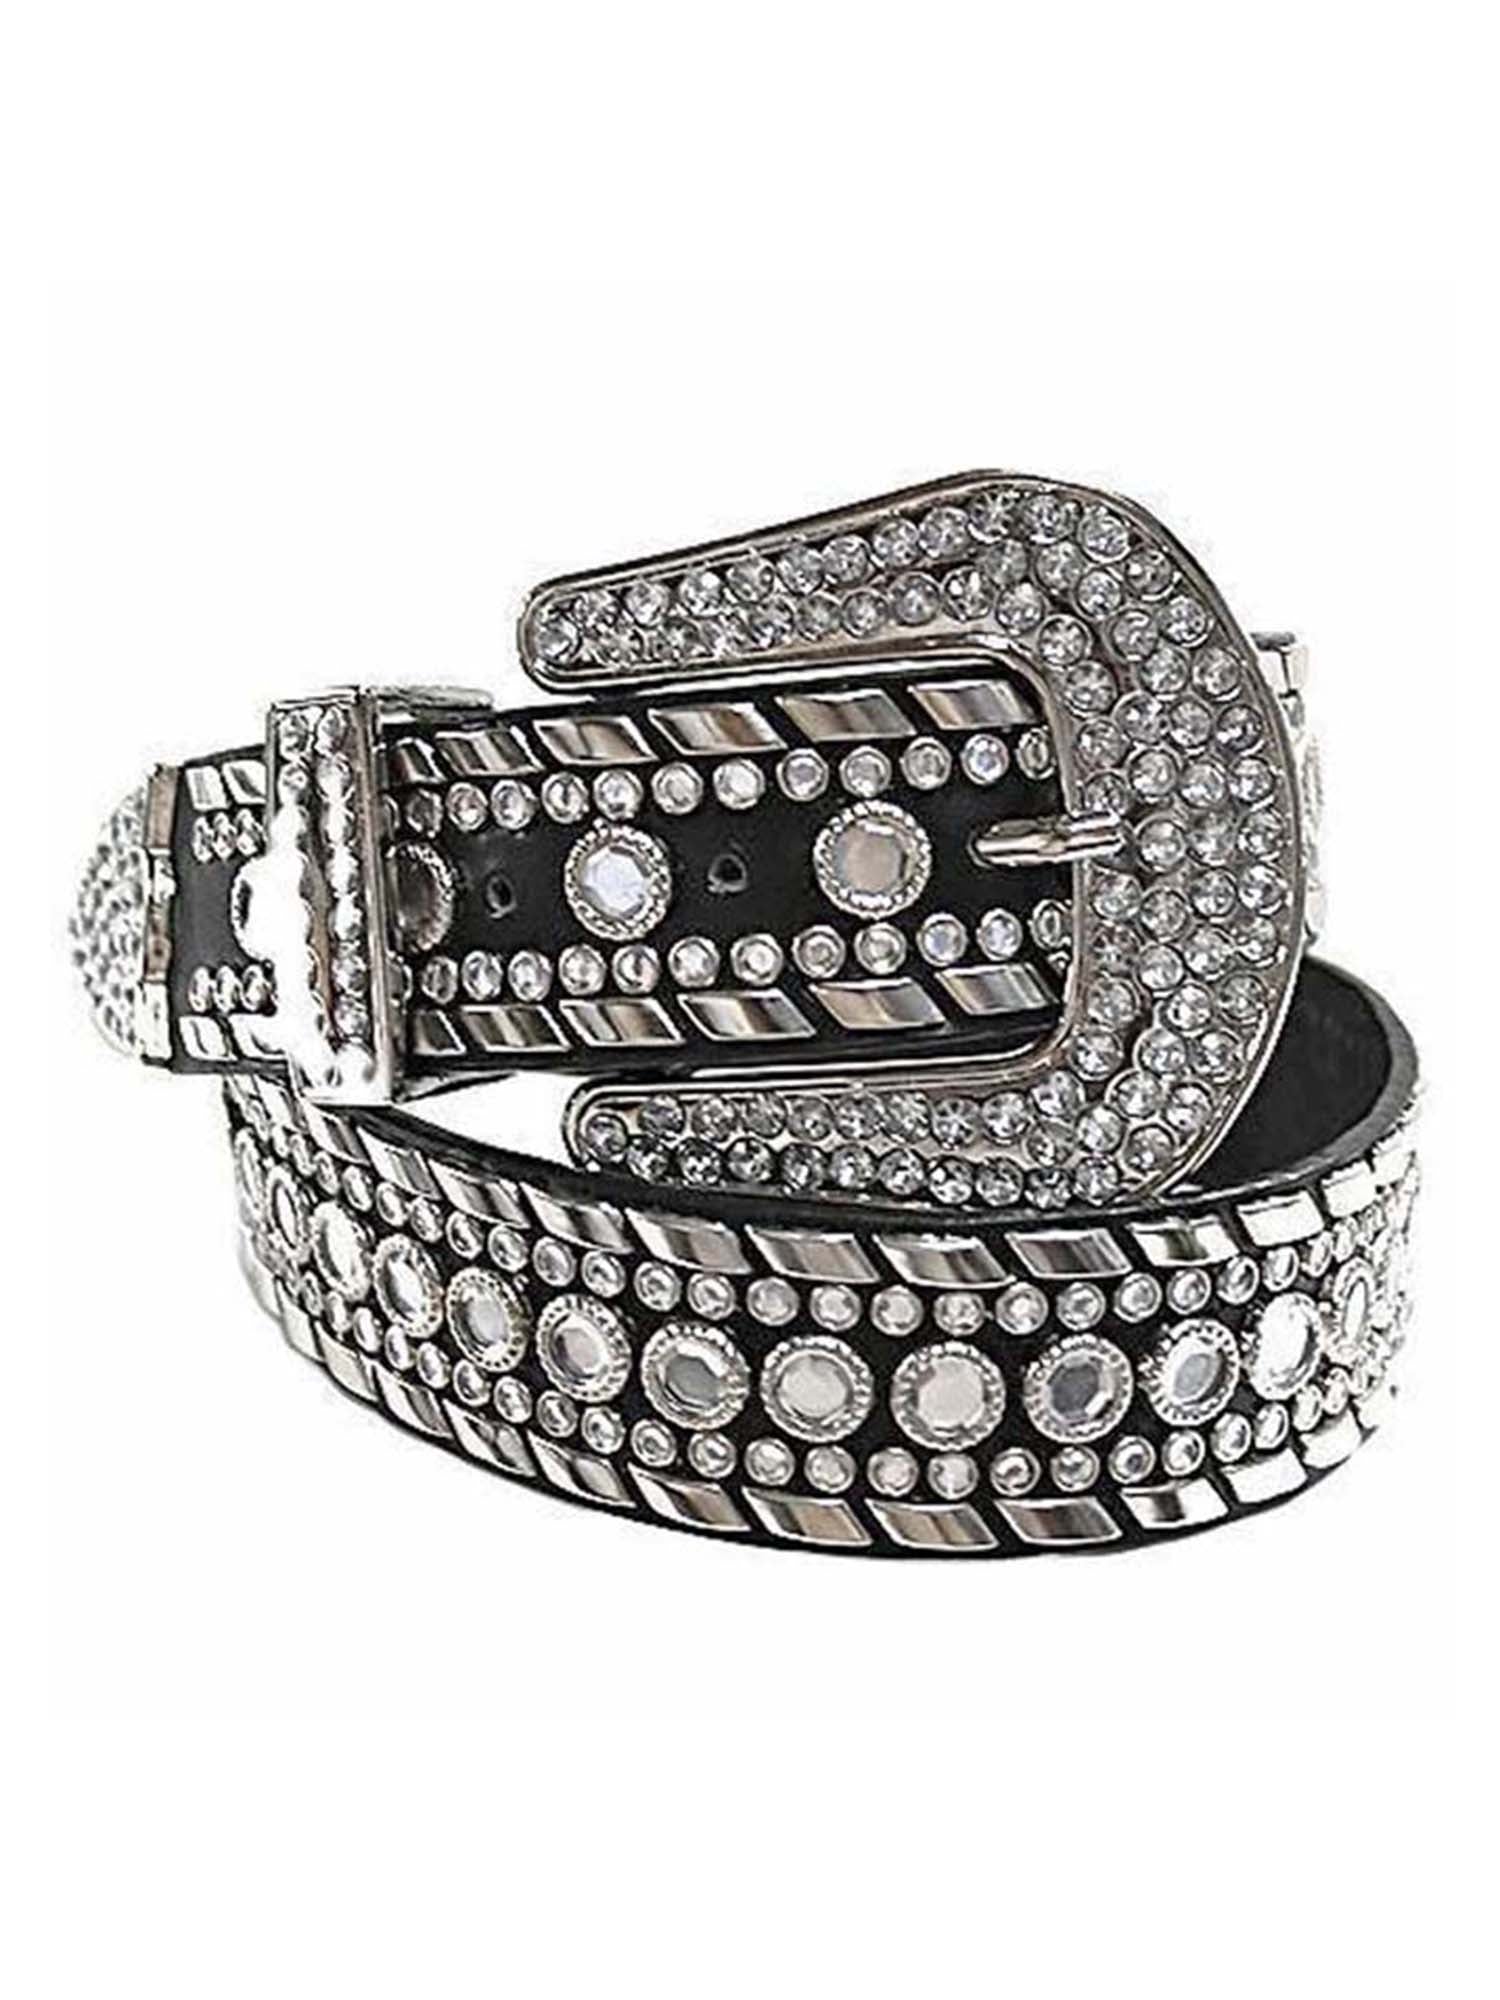 Western Belt Luxury Crystal Buckle Bling Strap Diamond Inlaid Belt For  Clothing Accessories Black 38 inch at  Women's Clothing store